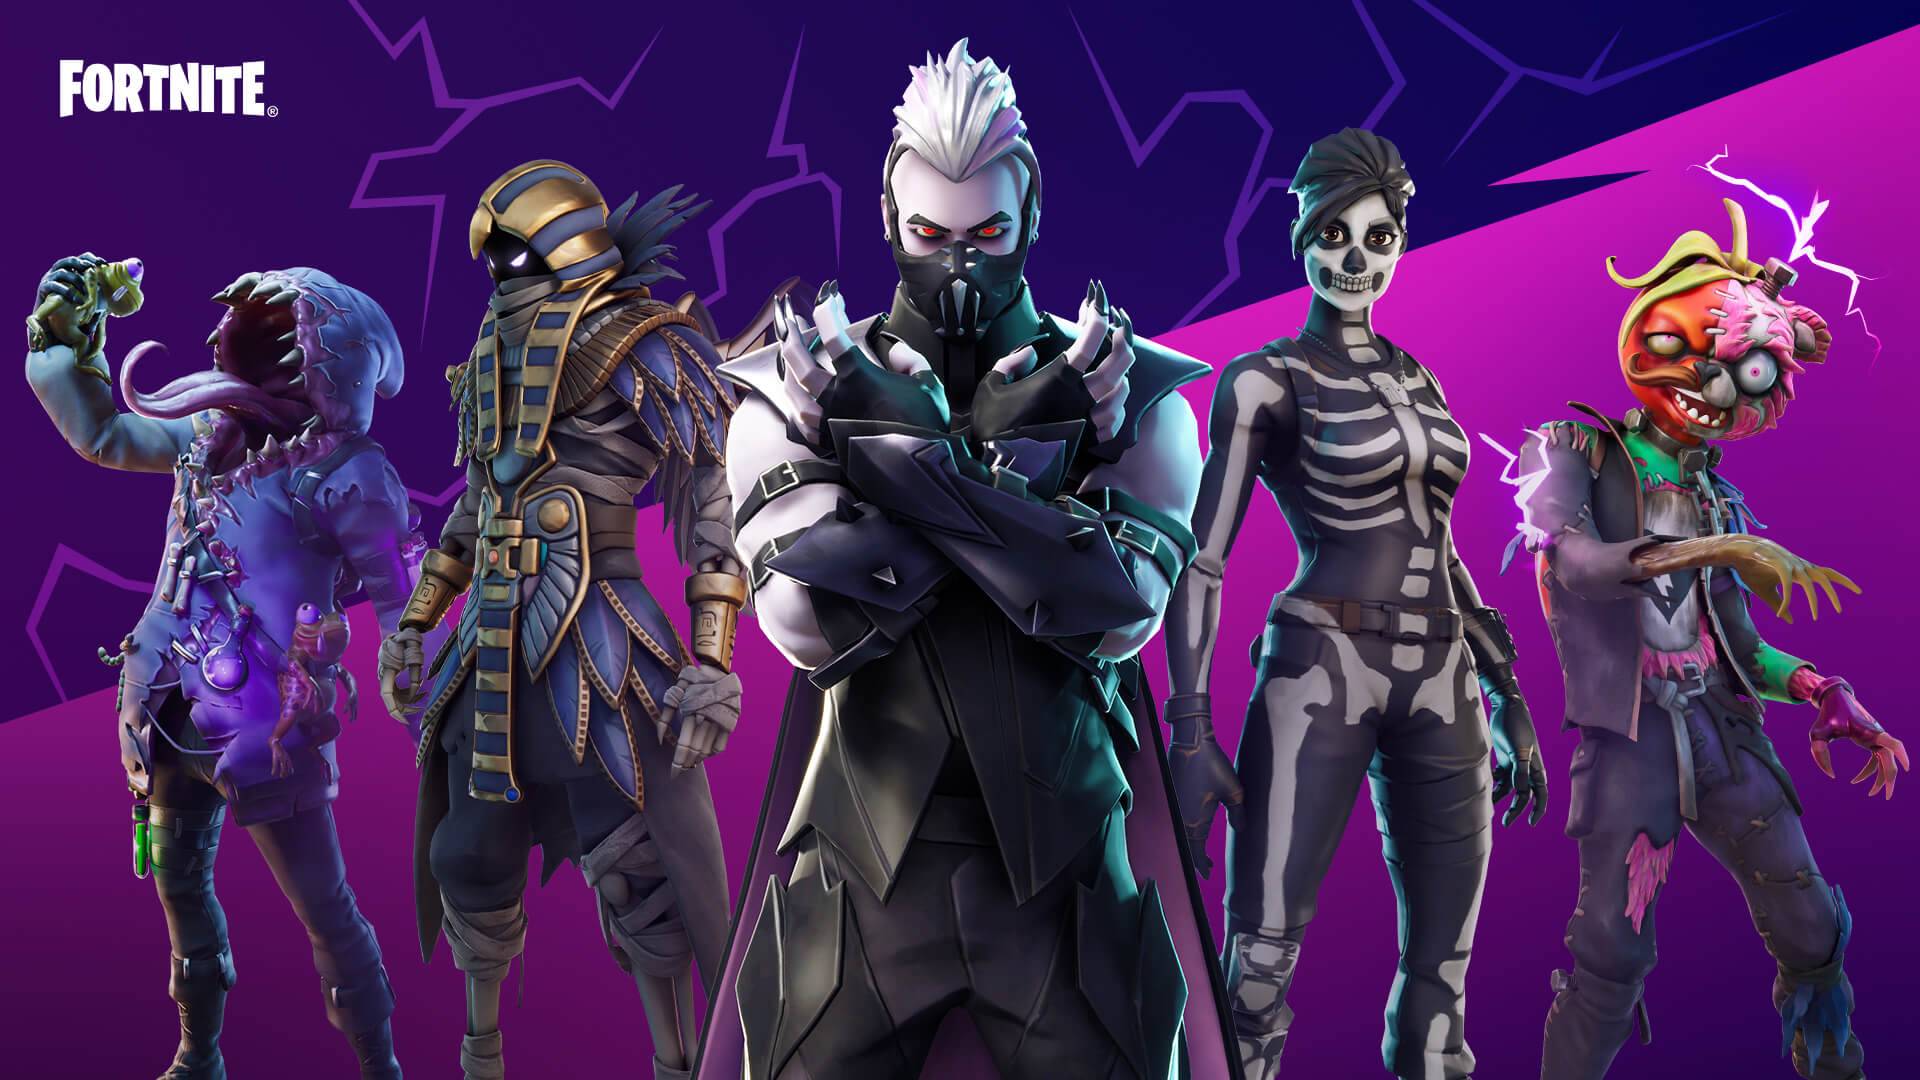 Fortnite - Fortnitemares 2022 event only two weeks away